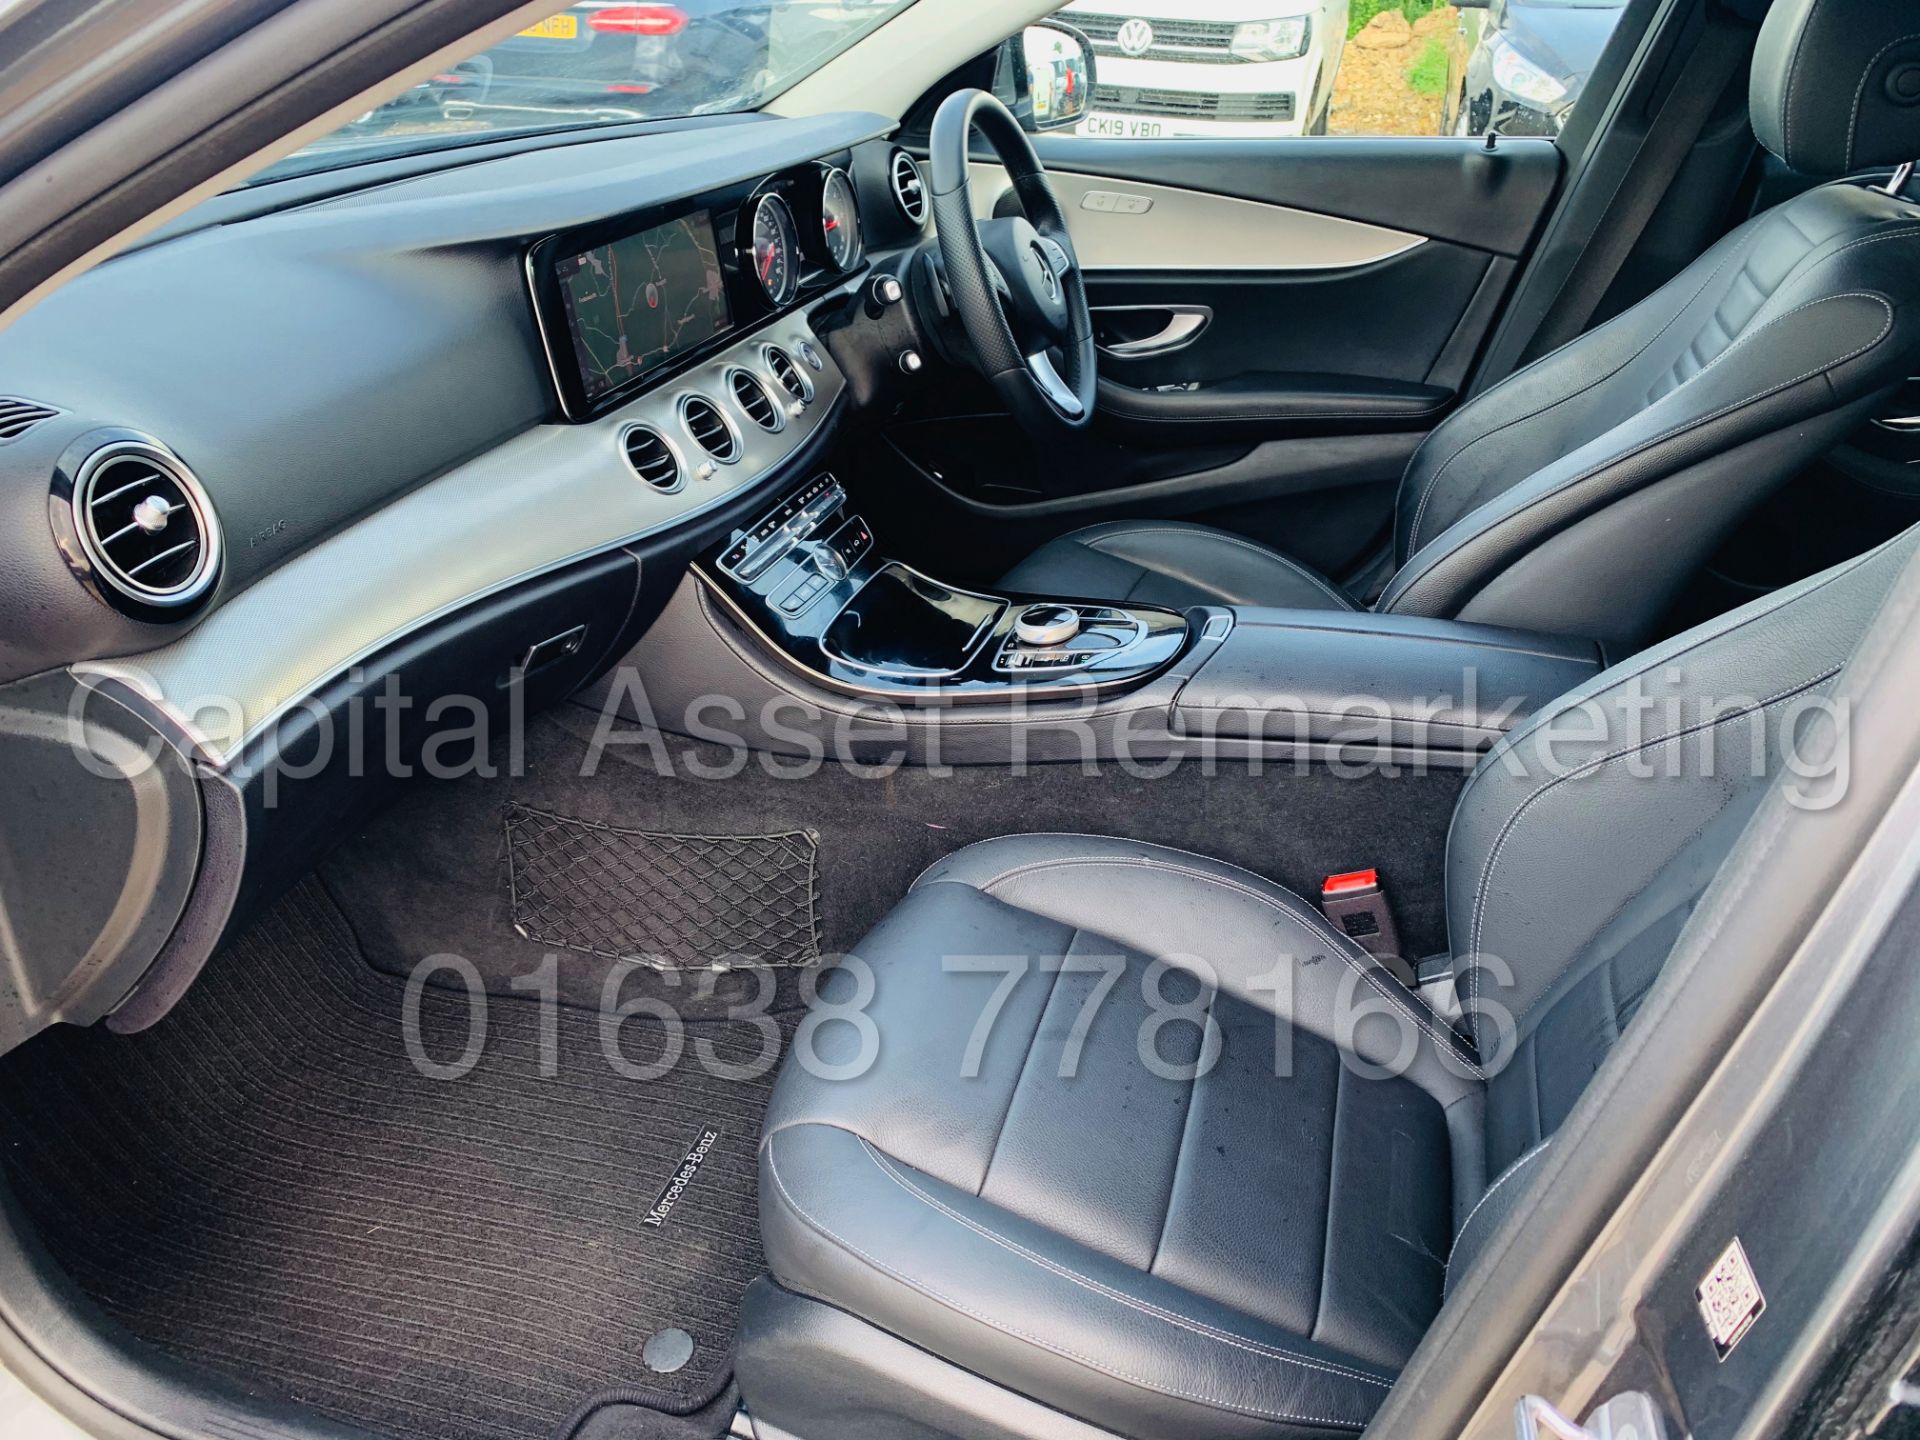 (On Sale) MERCEDES-BENZ E220d *SALOON* (2018 - NEW MODEL) '9G TRONIC AUTO - LEATHER - SAT NAV' - Image 23 of 50